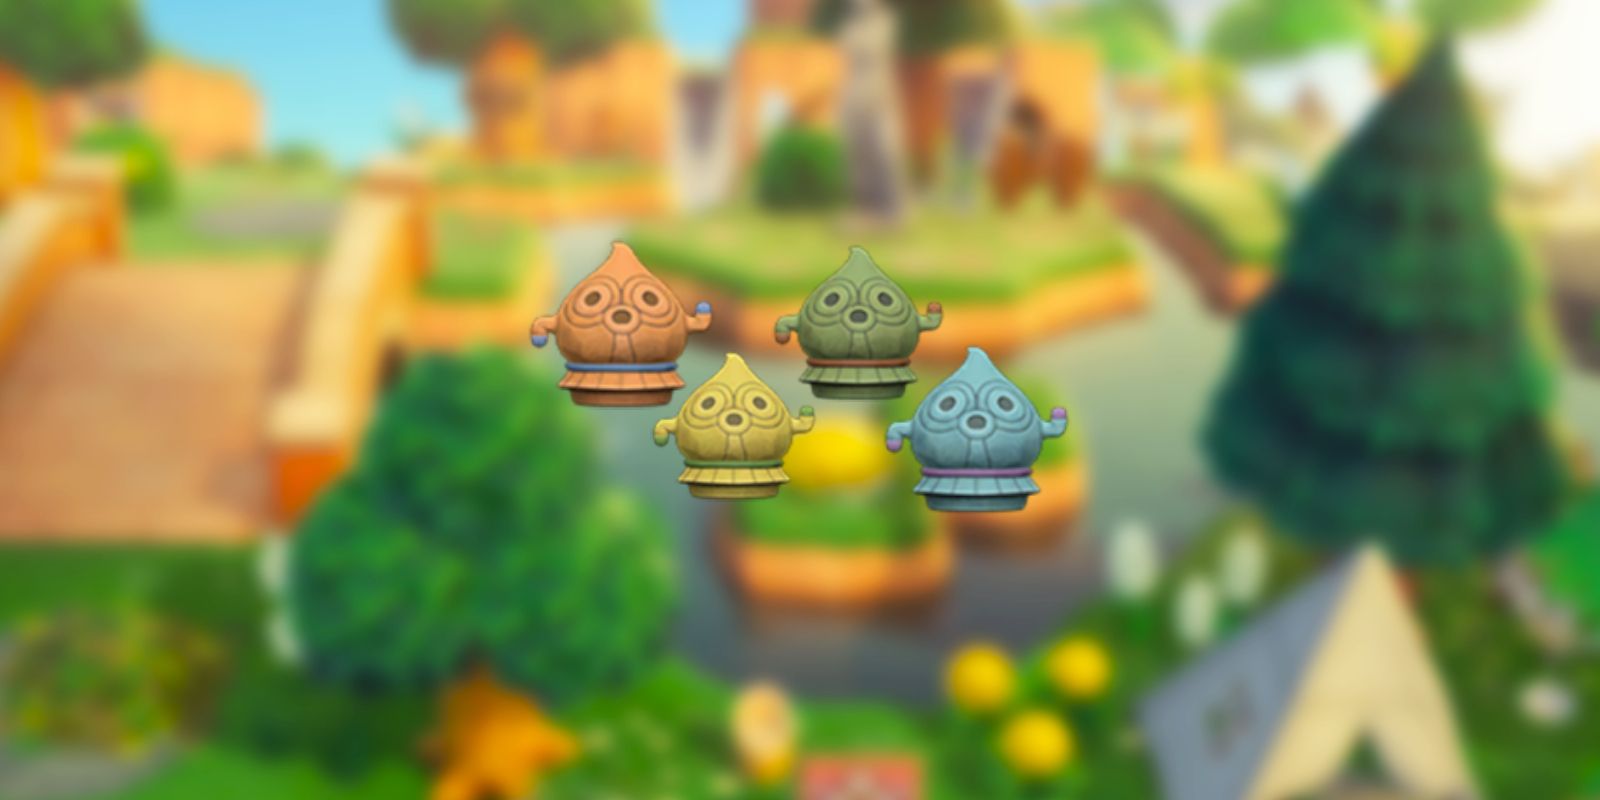 All New Gyroids In Animal Crossing 2.0 Bwongoid